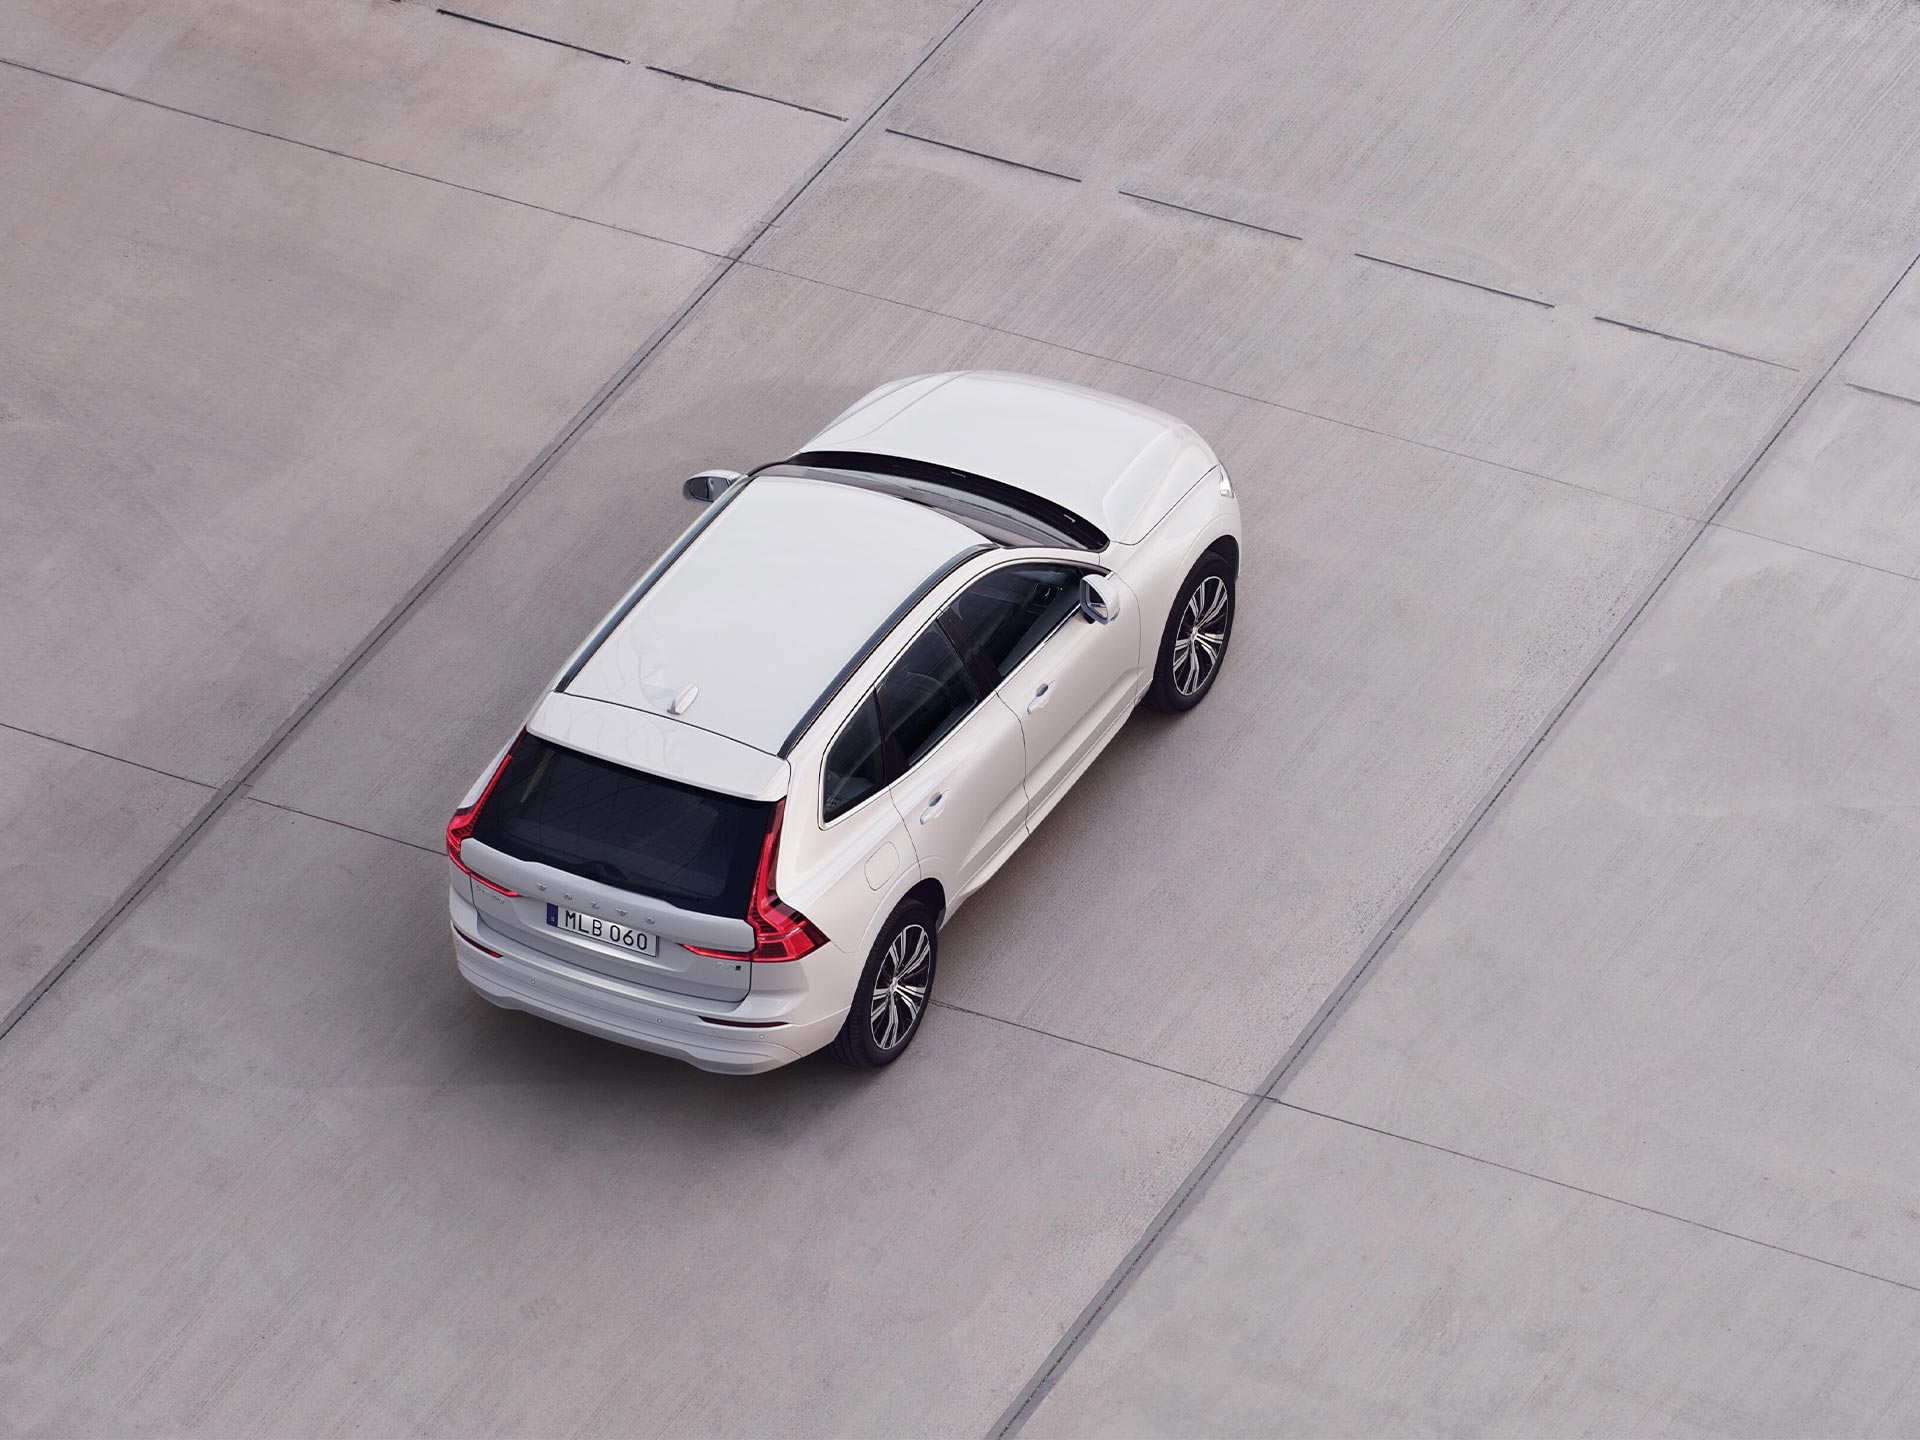 Top view of a Volvo XC60 SUV.